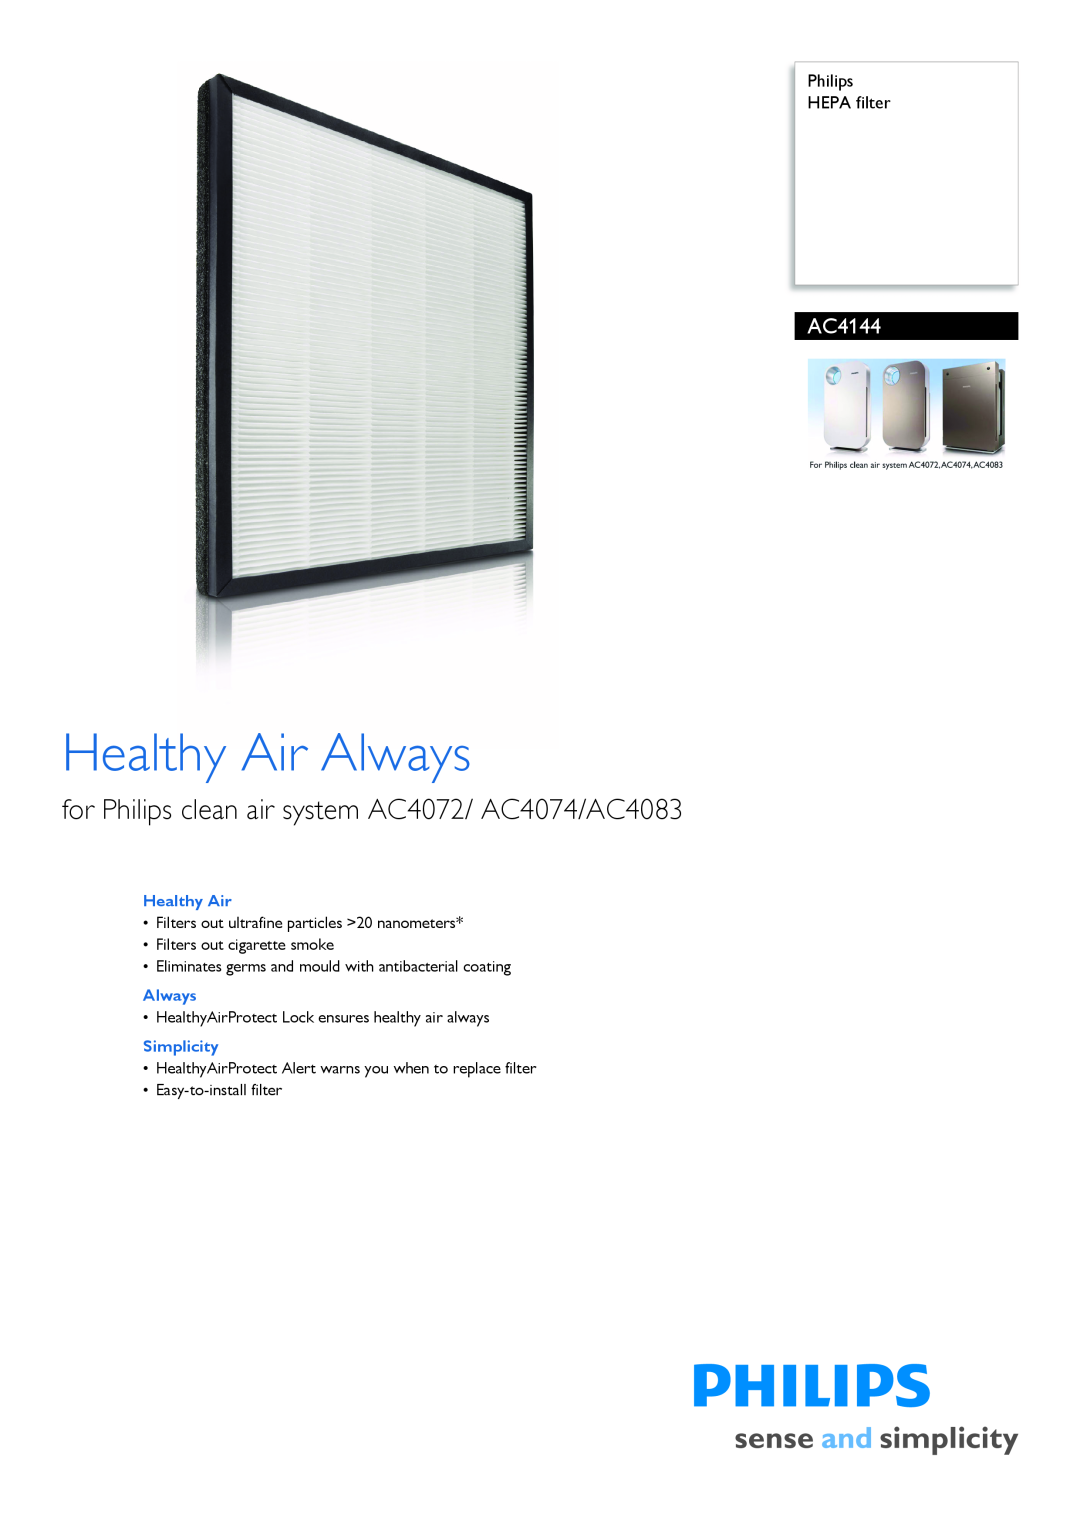 Philips AC4144/00 manual Philips HEPA filter, Simplicity, Healthy Air Always, Filters out cigarette smoke 